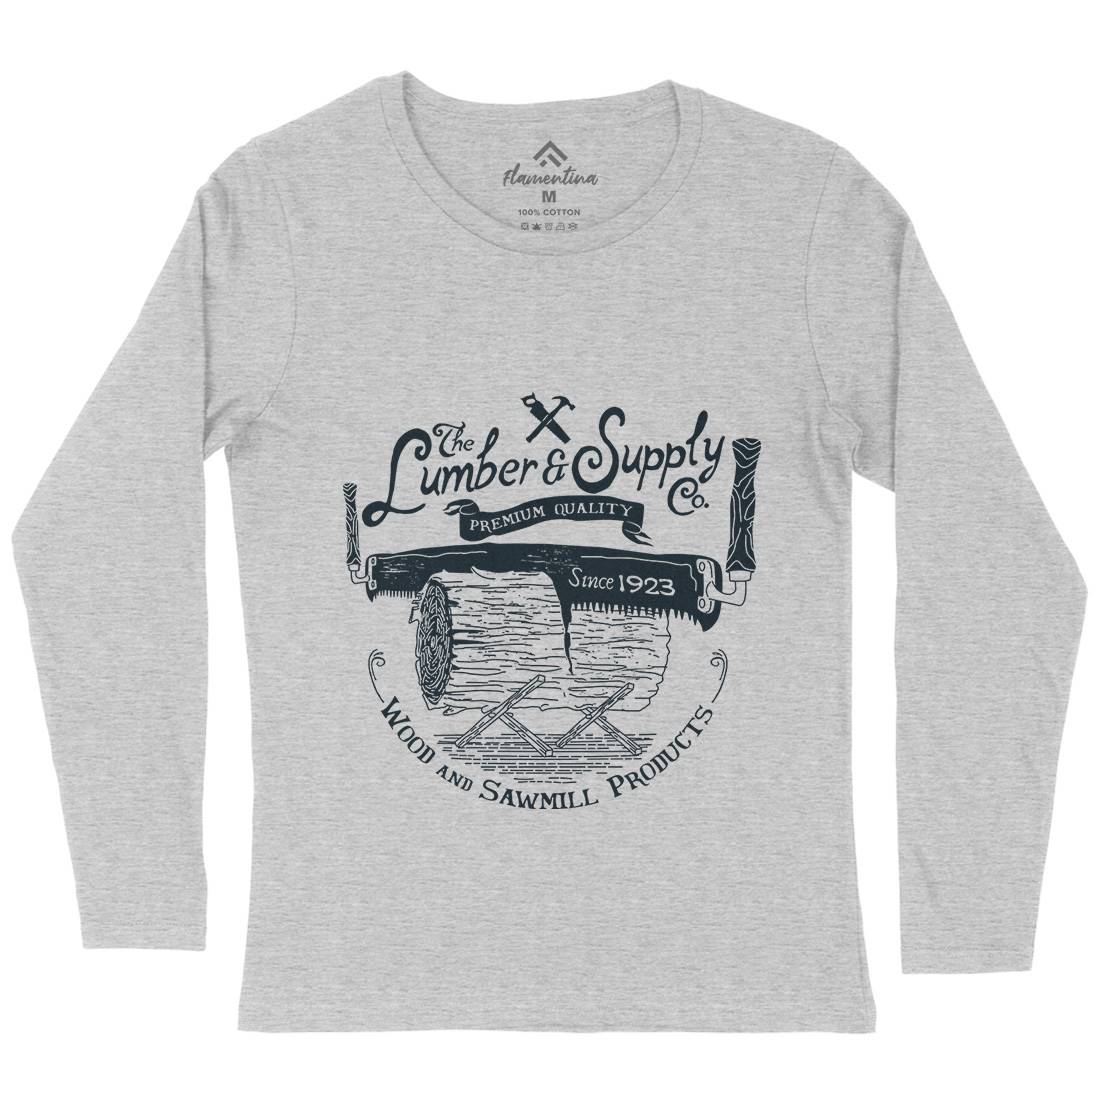 Lumber And Supply Womens Long Sleeve T-Shirt Work A975